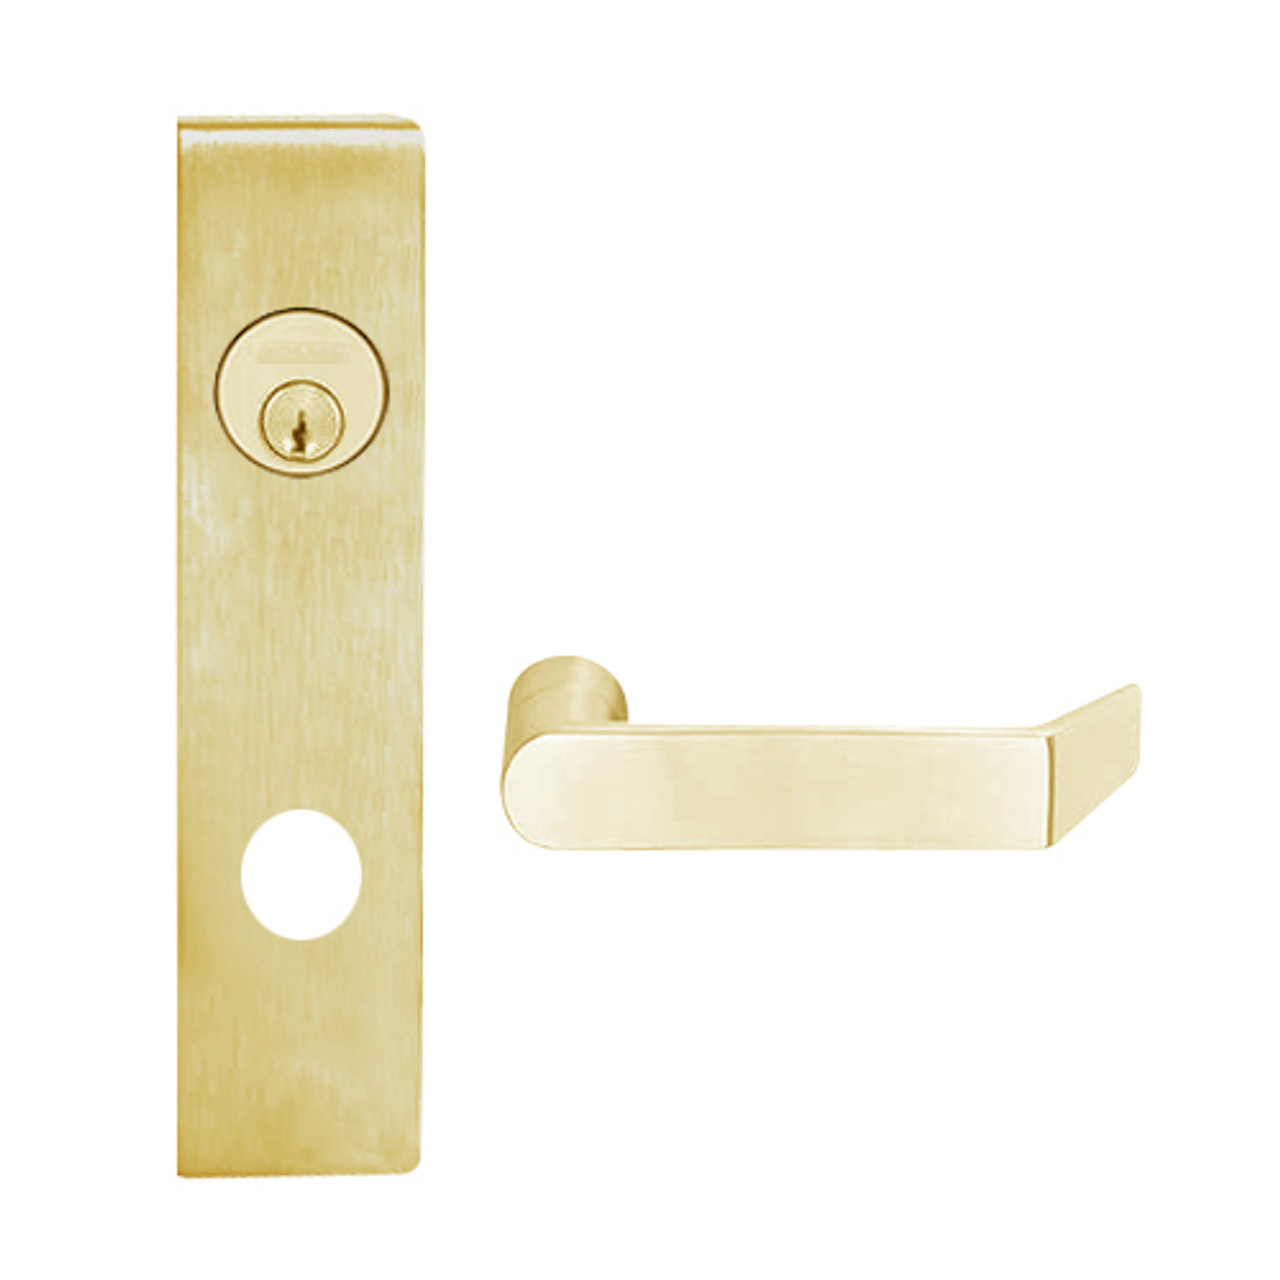 L9026L-06L-606 Schlage L Series Less Cylinder Exit Lock with Cylinder Commercial Mortise Lock with 06 Cast Lever Design in Satin Brass